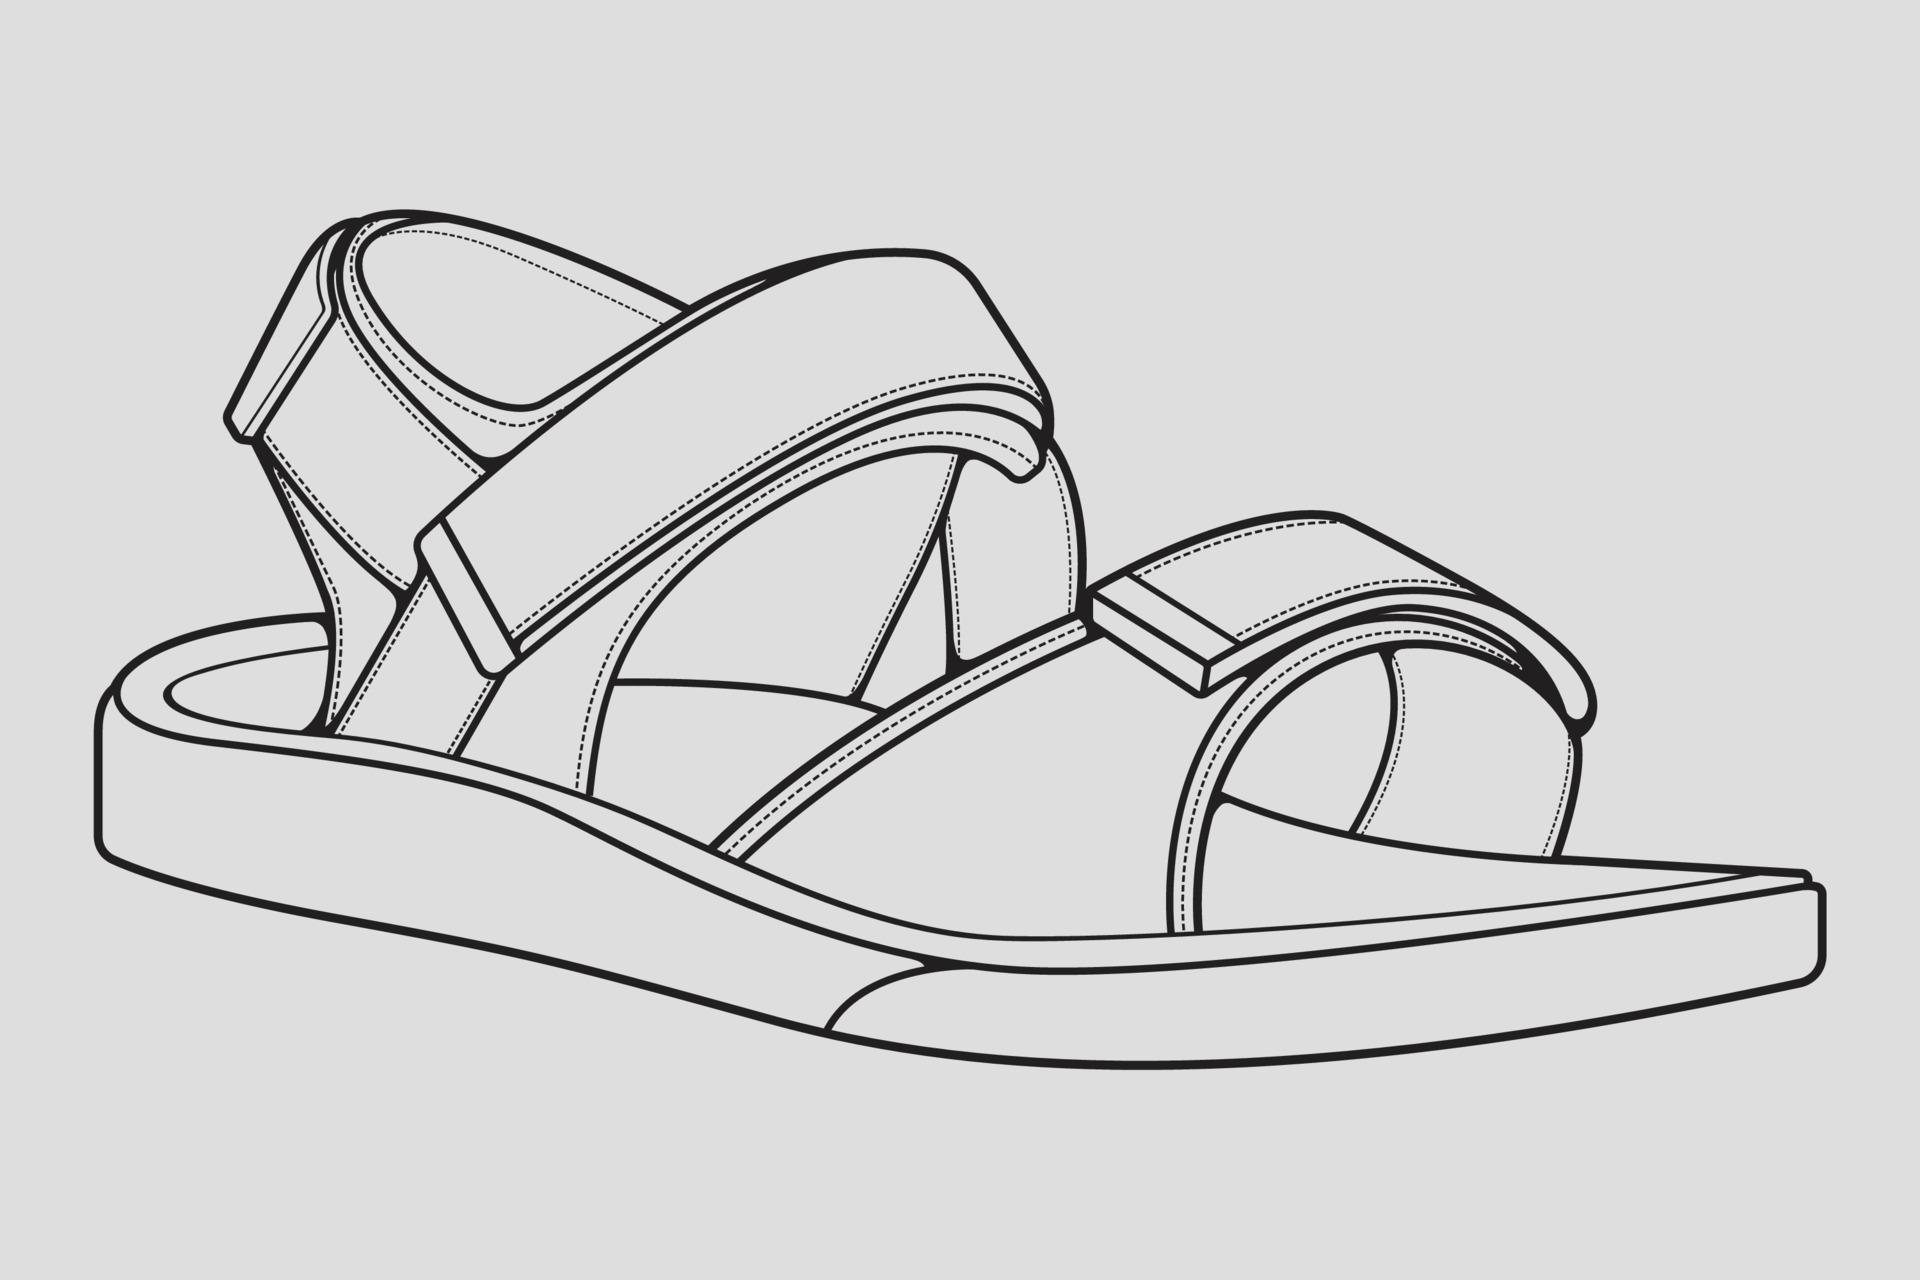 strap sandals outline drawing vector, strap sandals in a sketch style ...